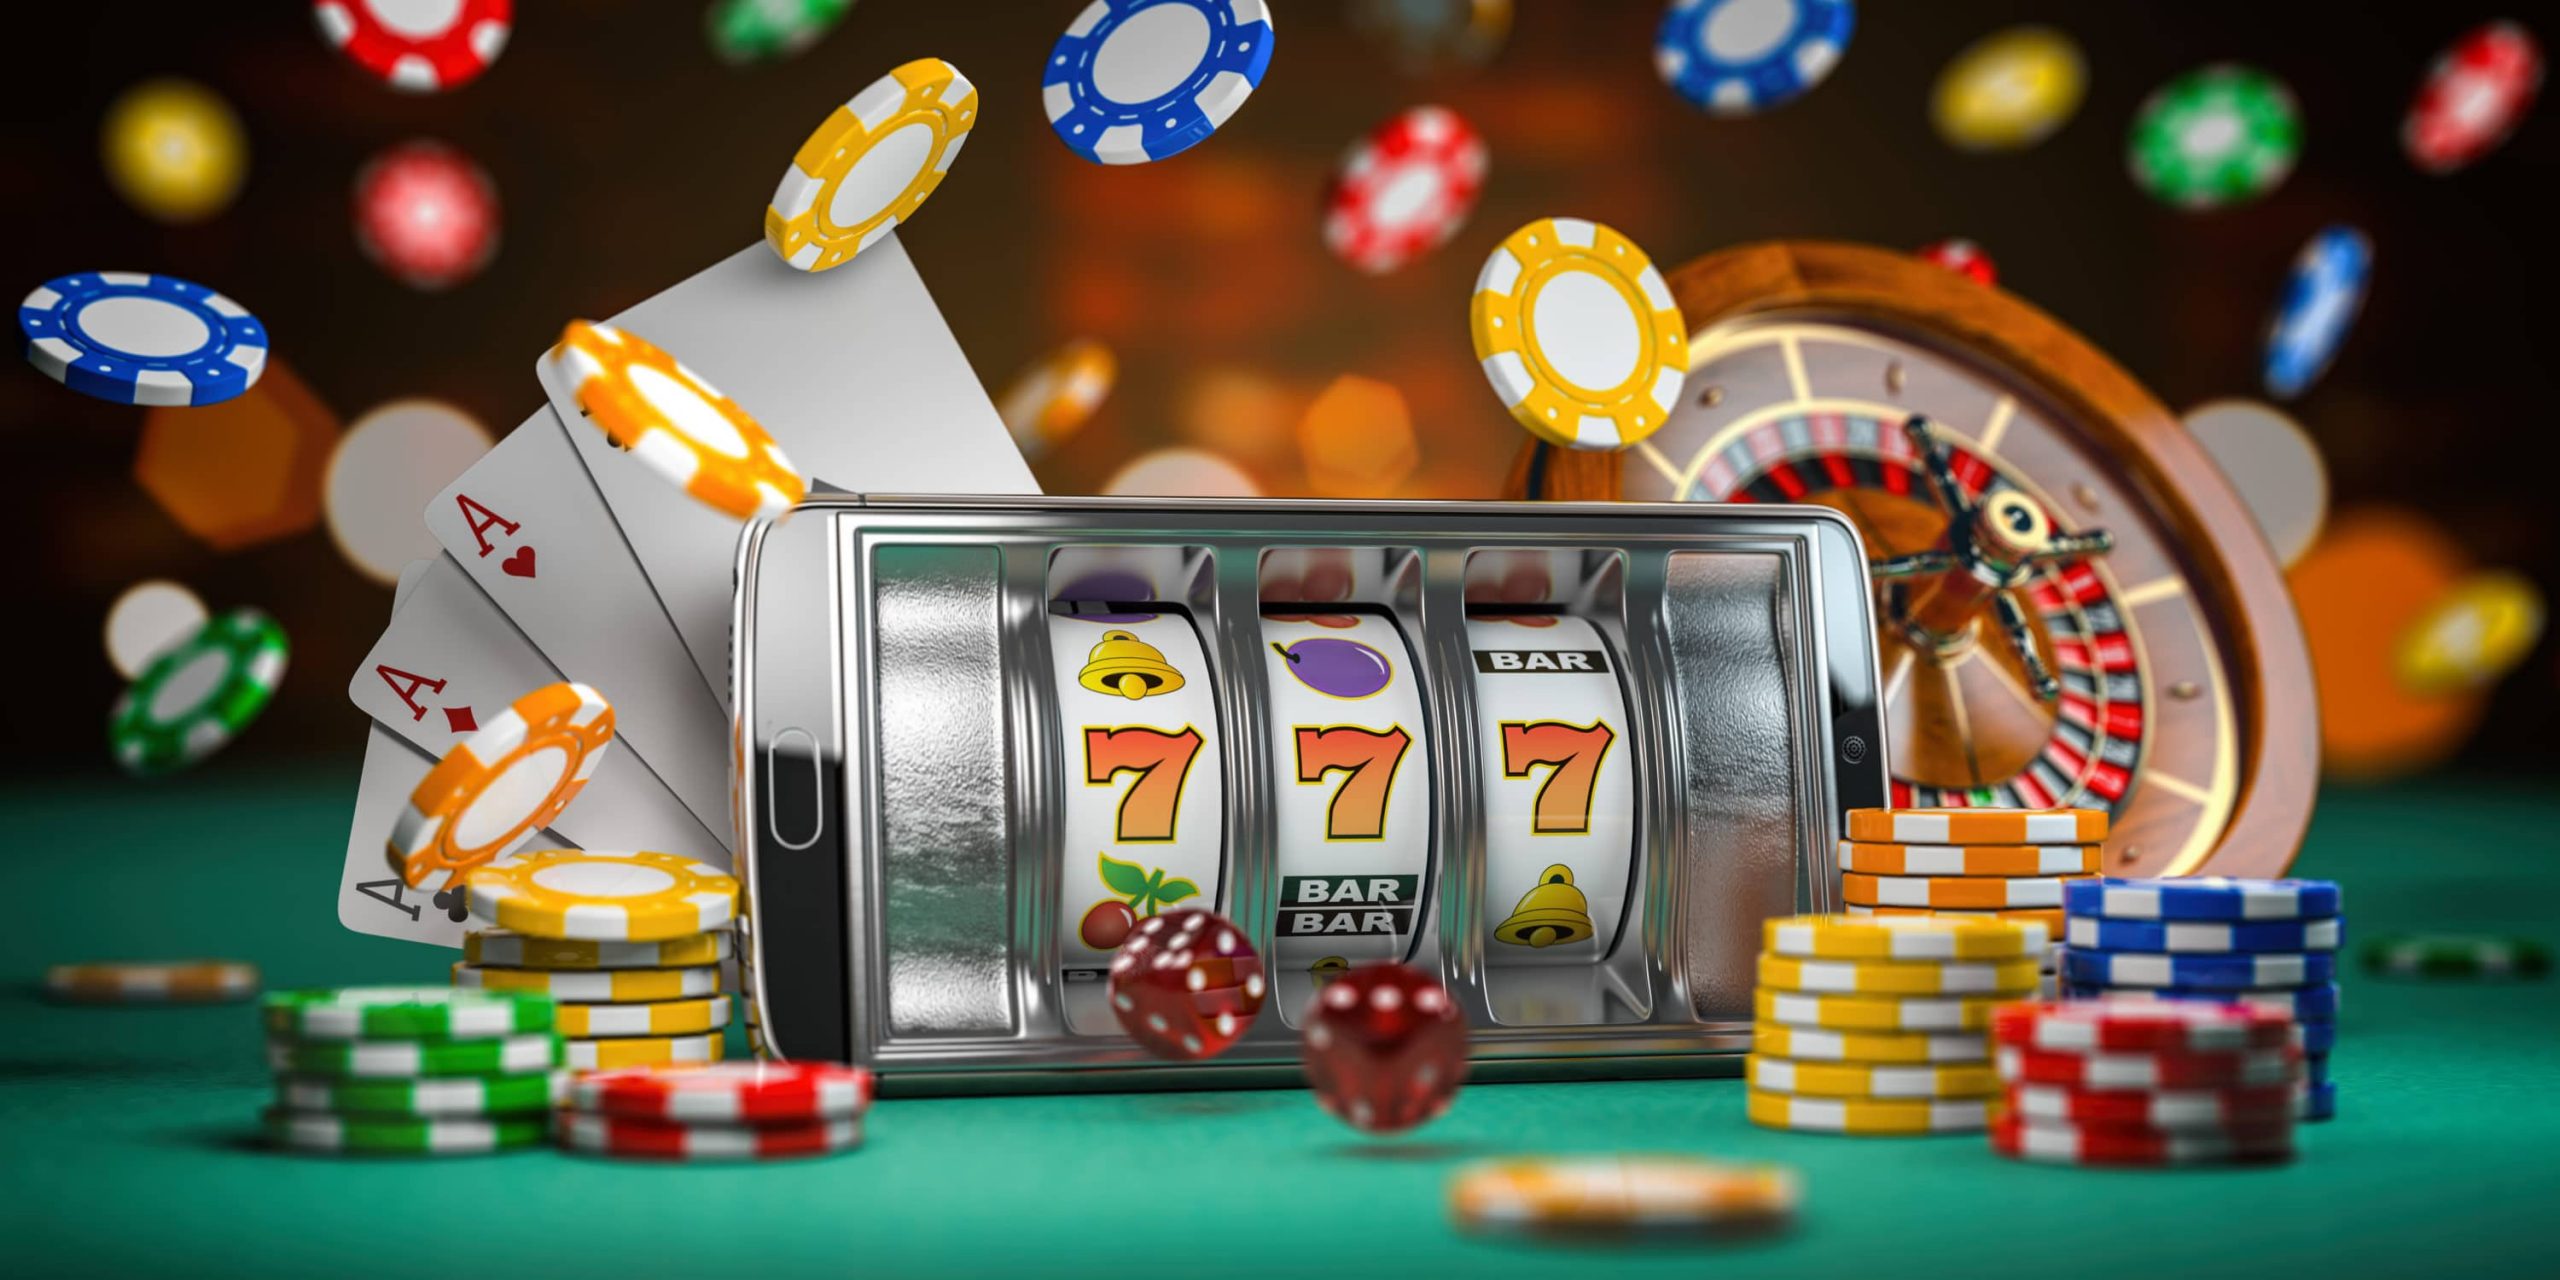 Why is ufayou famous for online gambling?